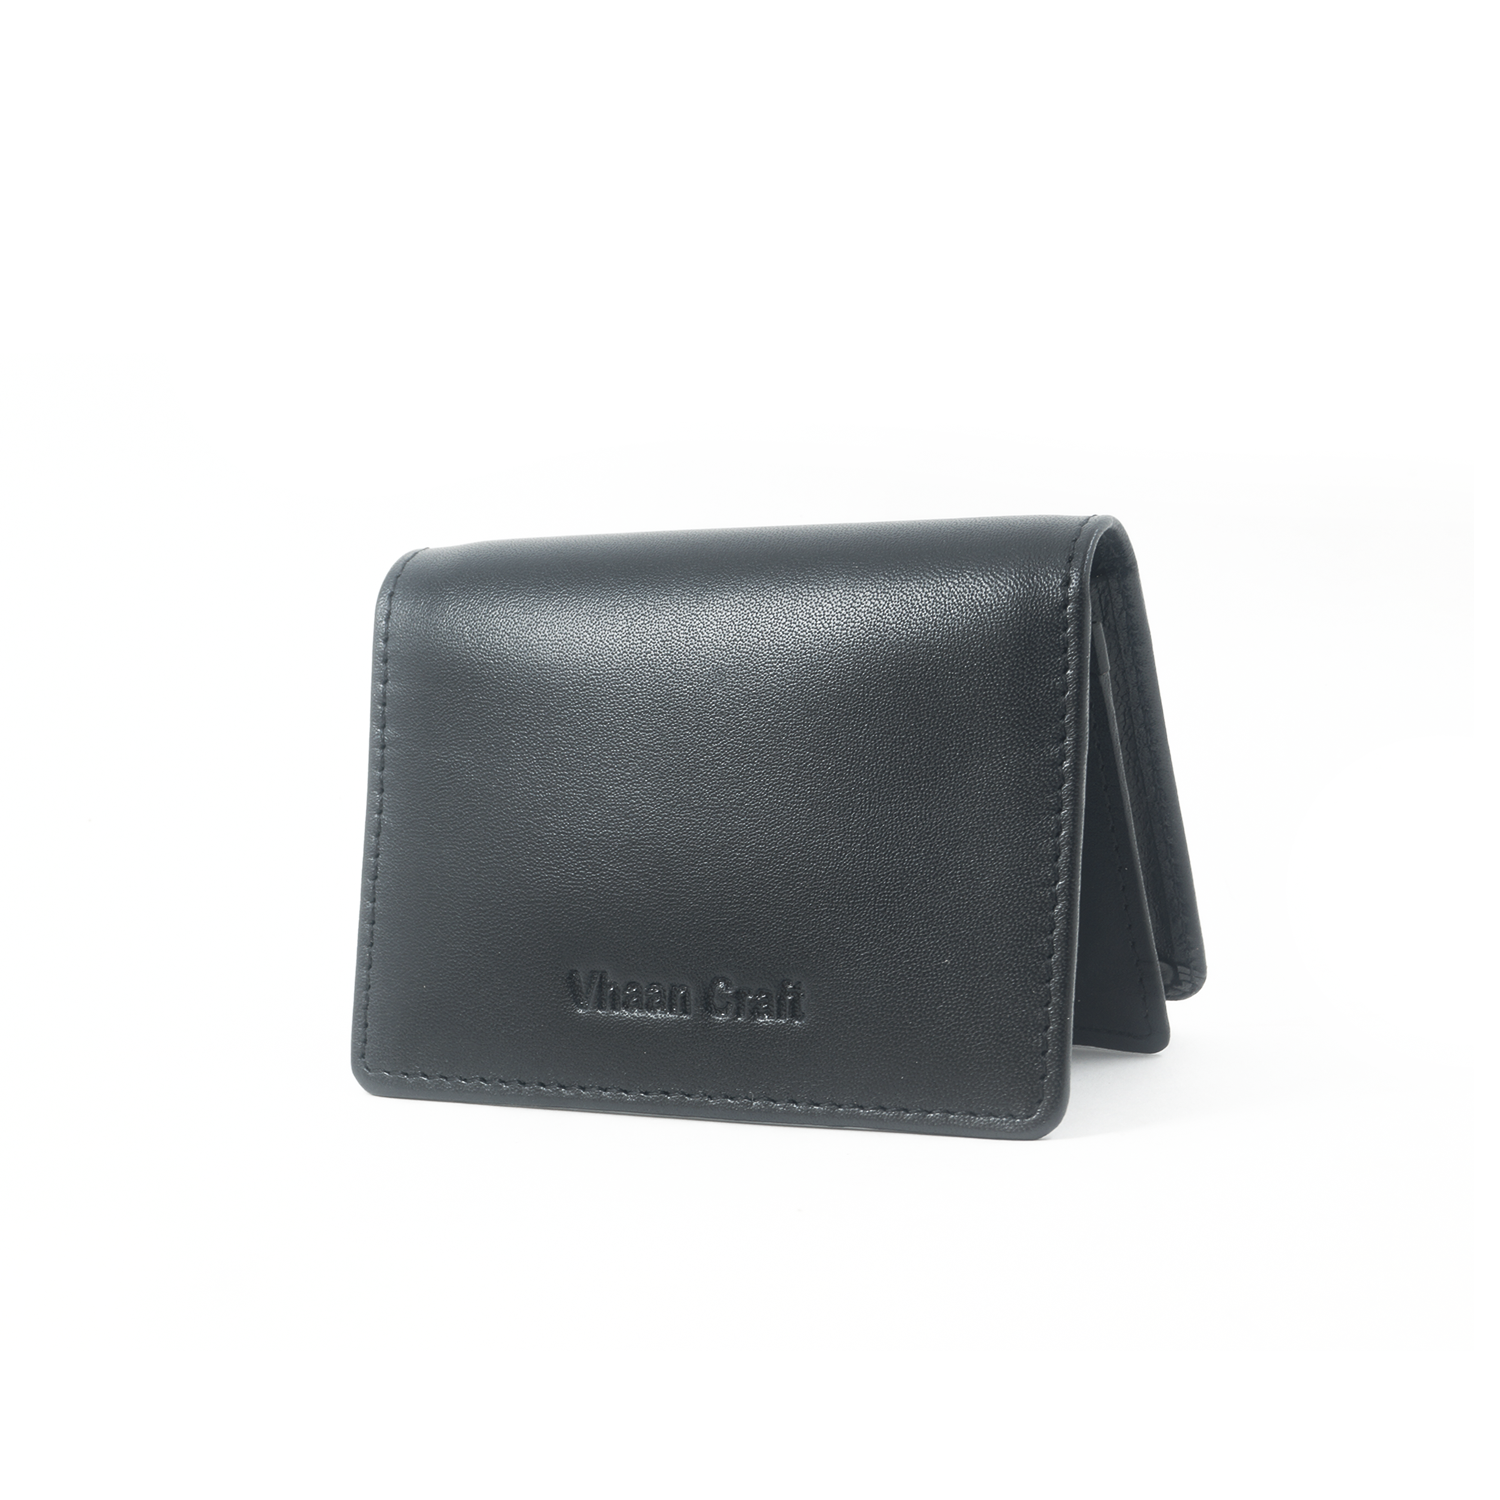 Premium Leather Card Holder with Protective Cover by Vhaan - Black